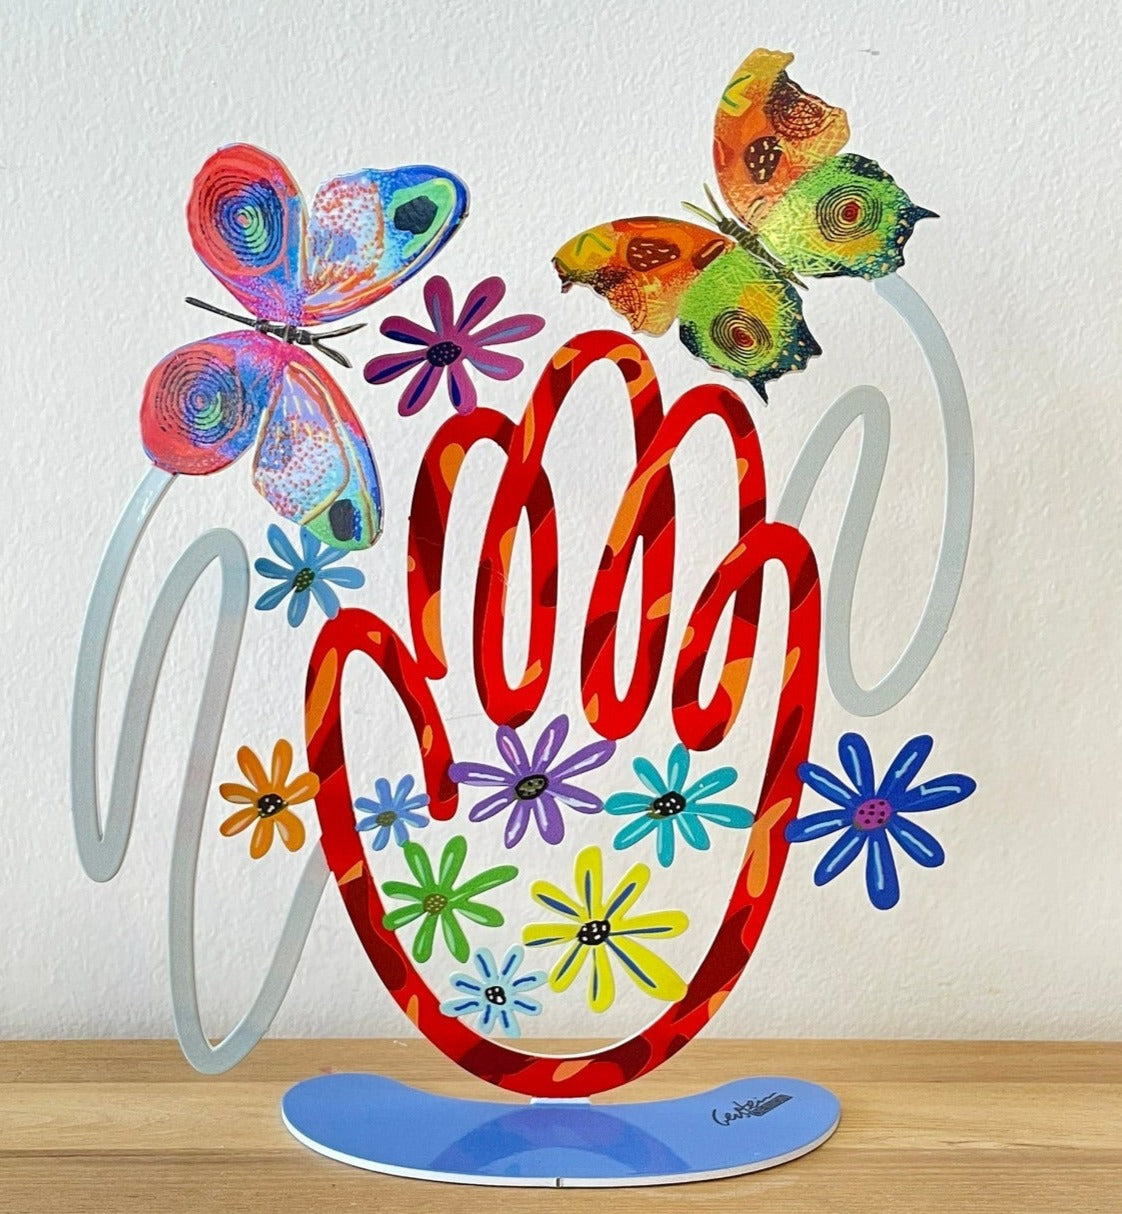 Hamsa is an ancient talisman known as protection against the evil eye and a virtue for happiness, wealth and health This special Hamsa is decorated with butterflies and flowers in vibrant colors. The Hamsa is painted on both sides, and comes with a base so you can place it anywhere you want. Gerstein's signature is printed on the base.